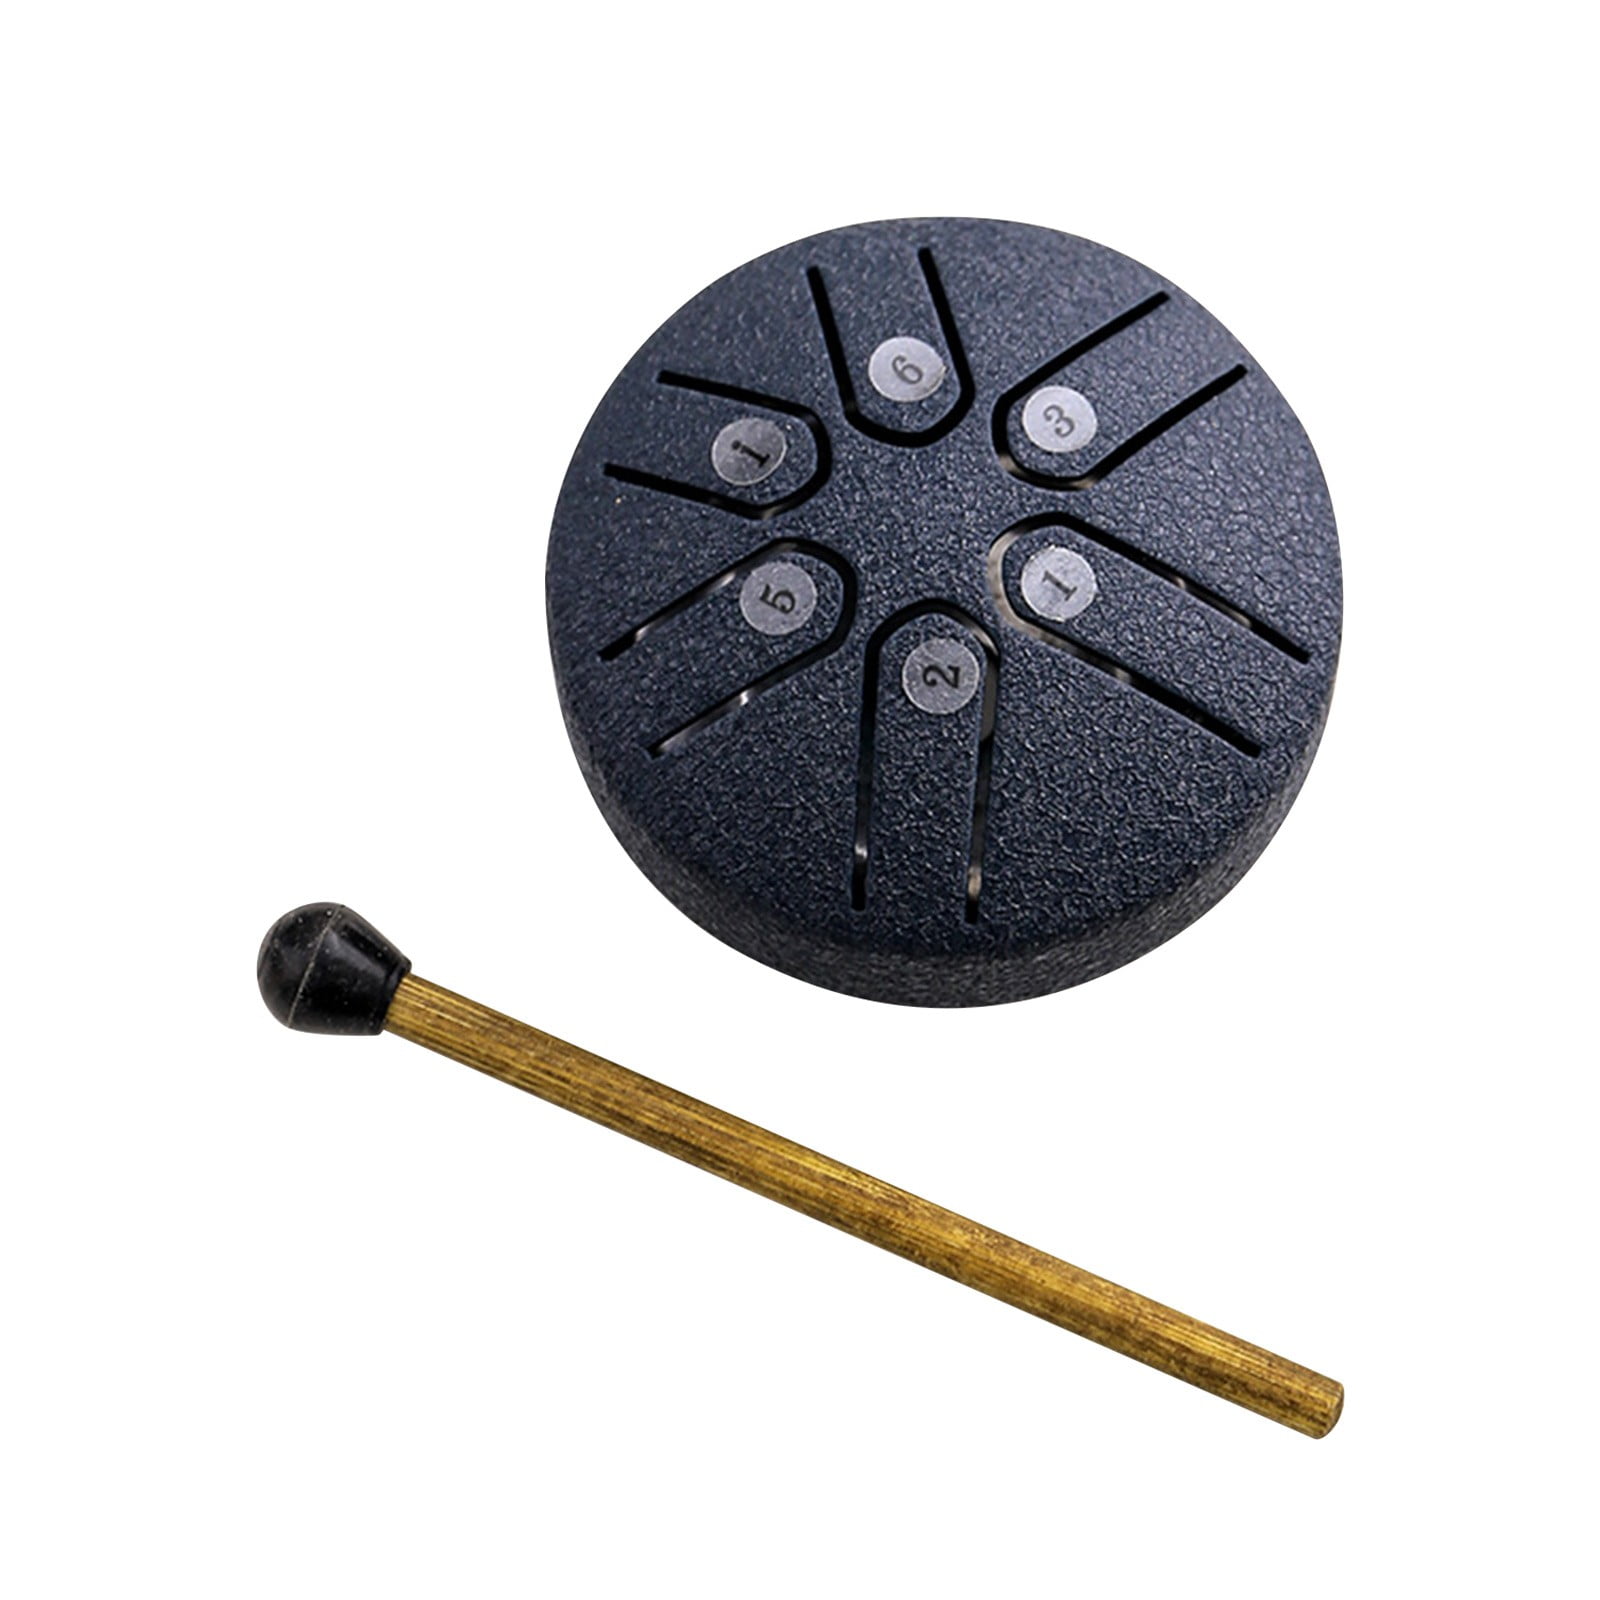 Steel Tongue Drum 6 Inch 8 Notes Hand Drums with Bag Sticks Music Book,  Sound Healing Instruments for Musical Education Entertainment Meditation  Yoga